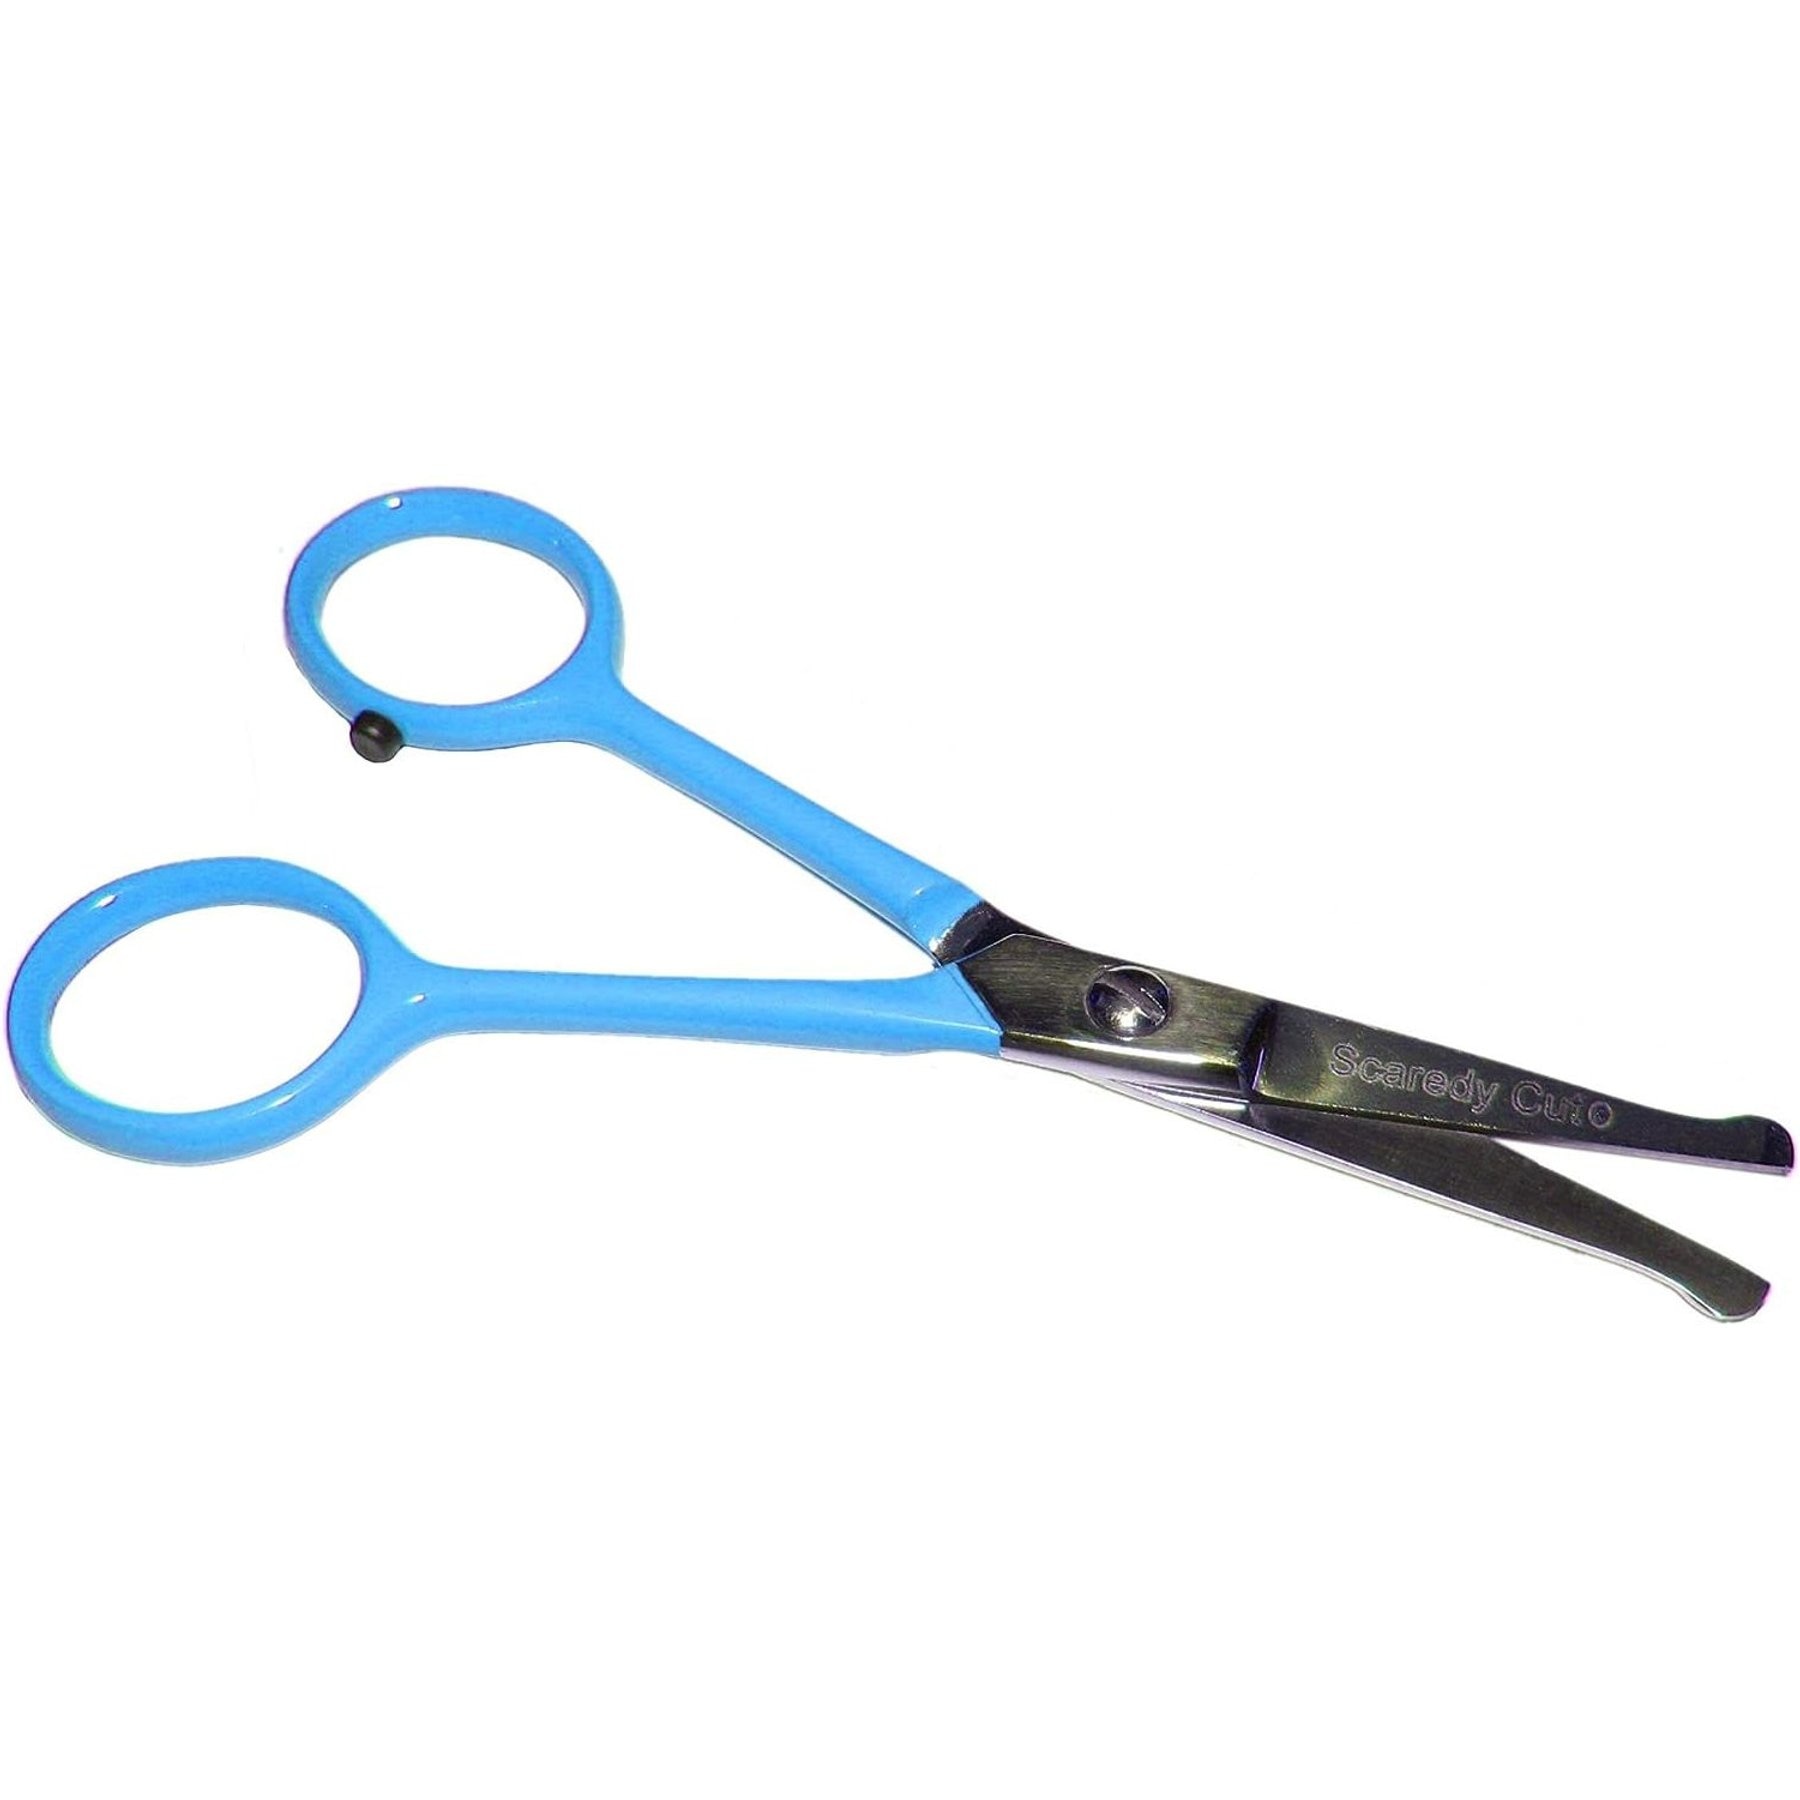 Scaredy Cut Grooming Scissors and Comb Set for Guinea Pigs